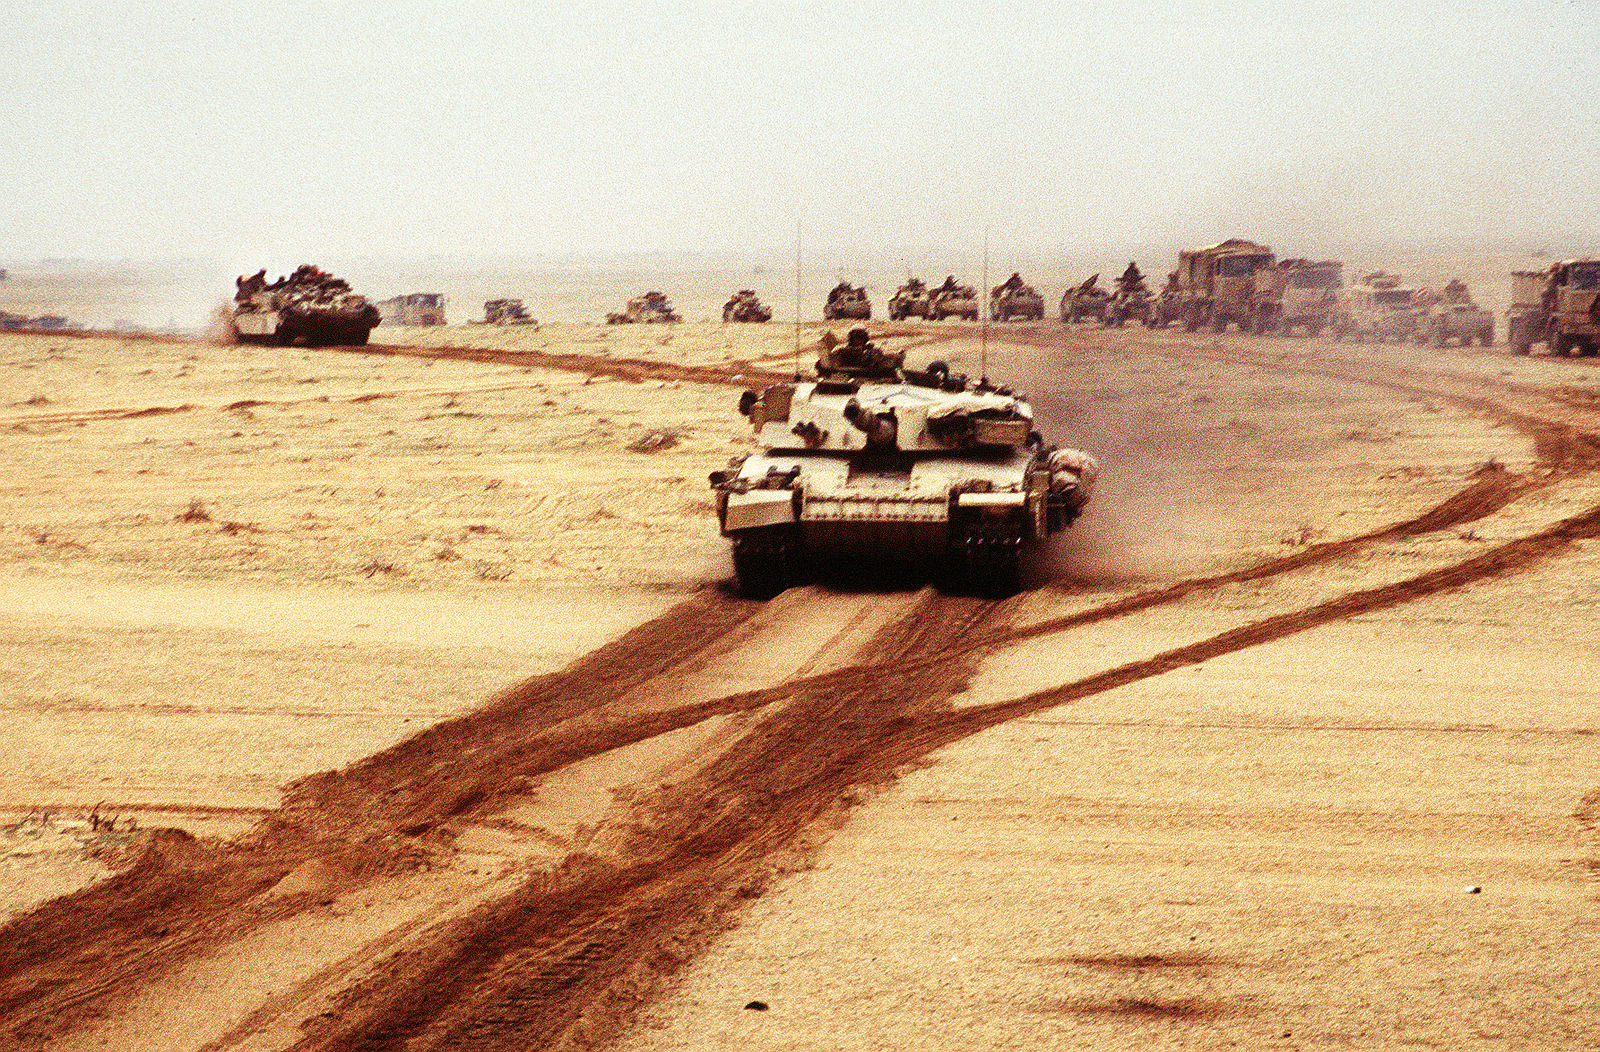 A British Challenger 1 main battle tank moves along with other Allied armor during Operation Desert Storm.